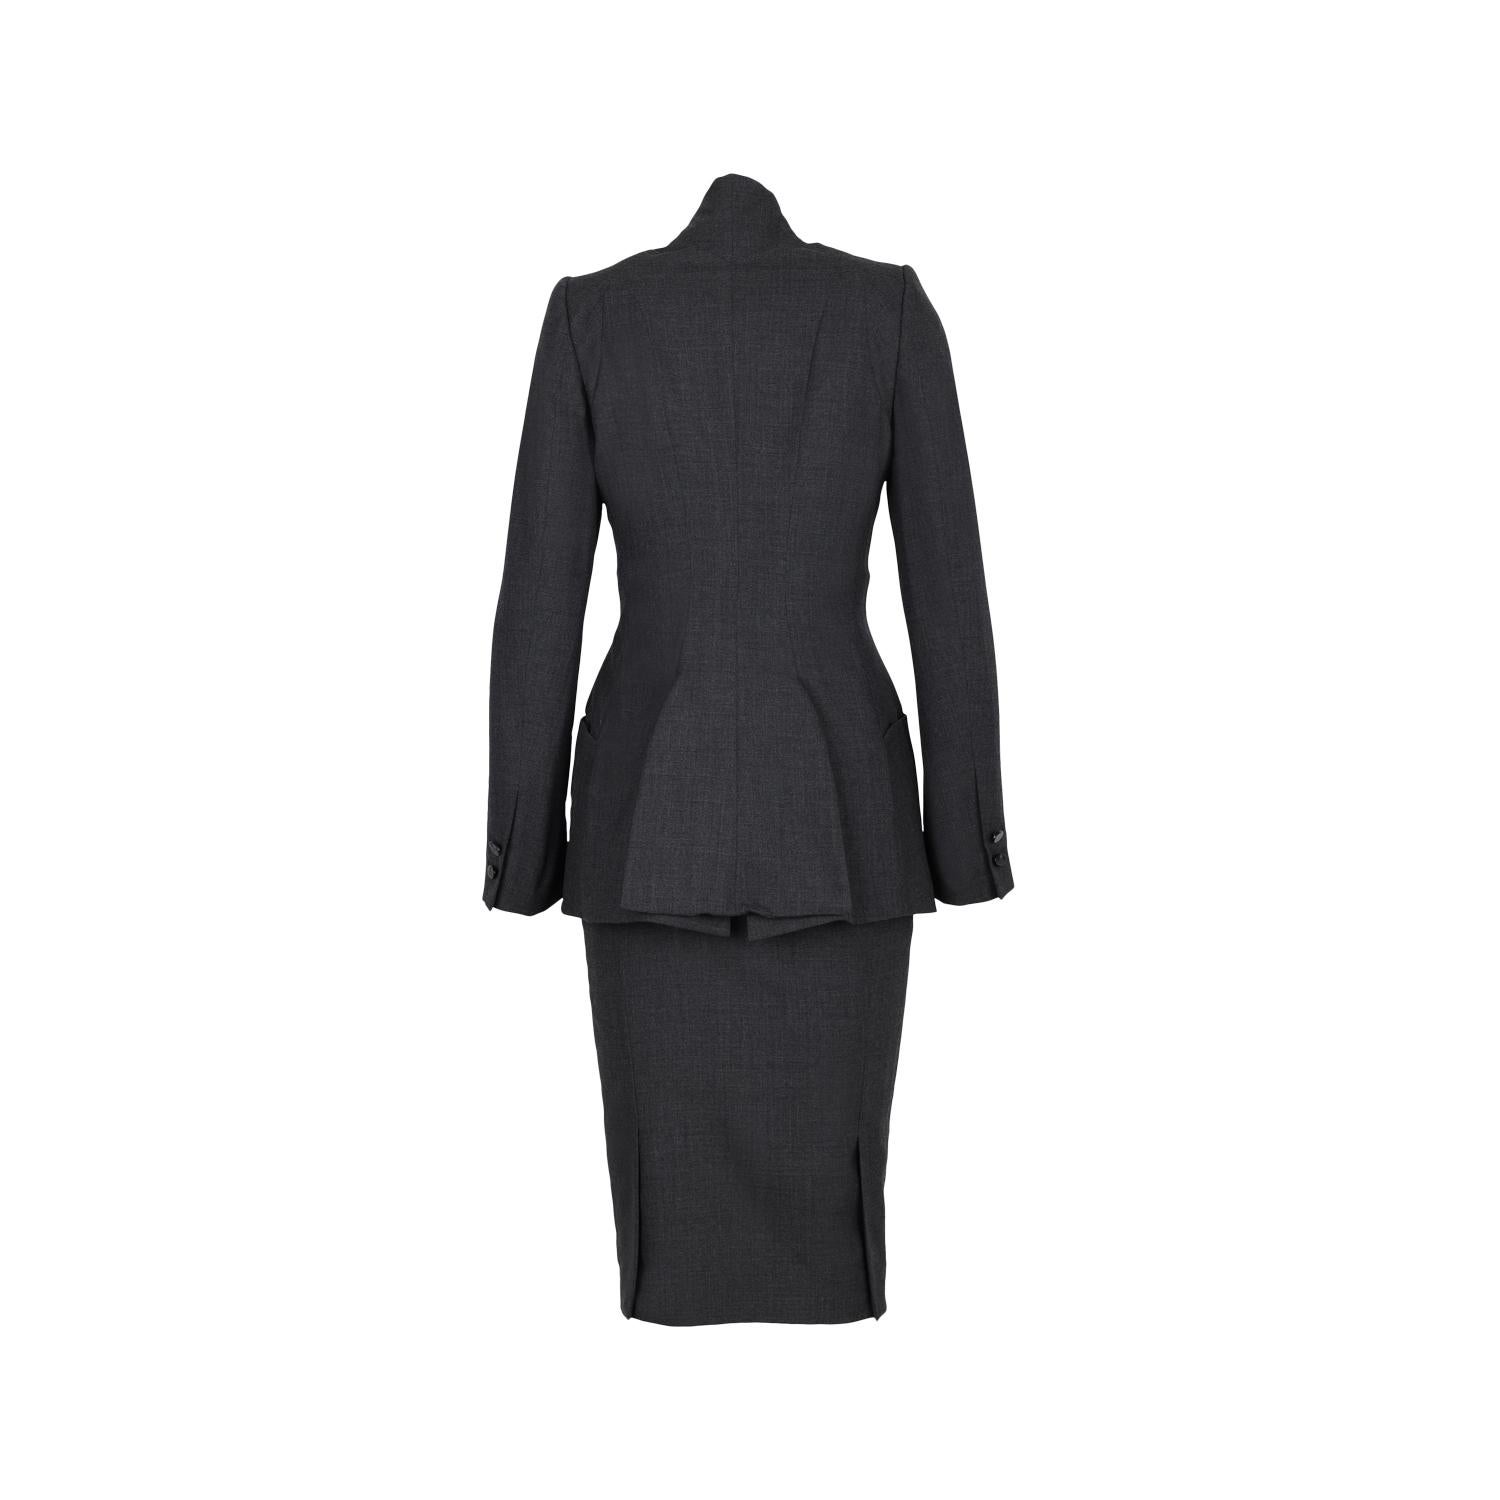 Vivienne Westwood Gold Label Couture peg skirt suit set, including a jacket with long sleeve and button fastening, and skirt with zip fastening.

Total length - 67 cm
Bust - 43 cm
Shoulders - 35 cm
Sleeves - 60 cm
Total length - 75 cm
Waist - 30